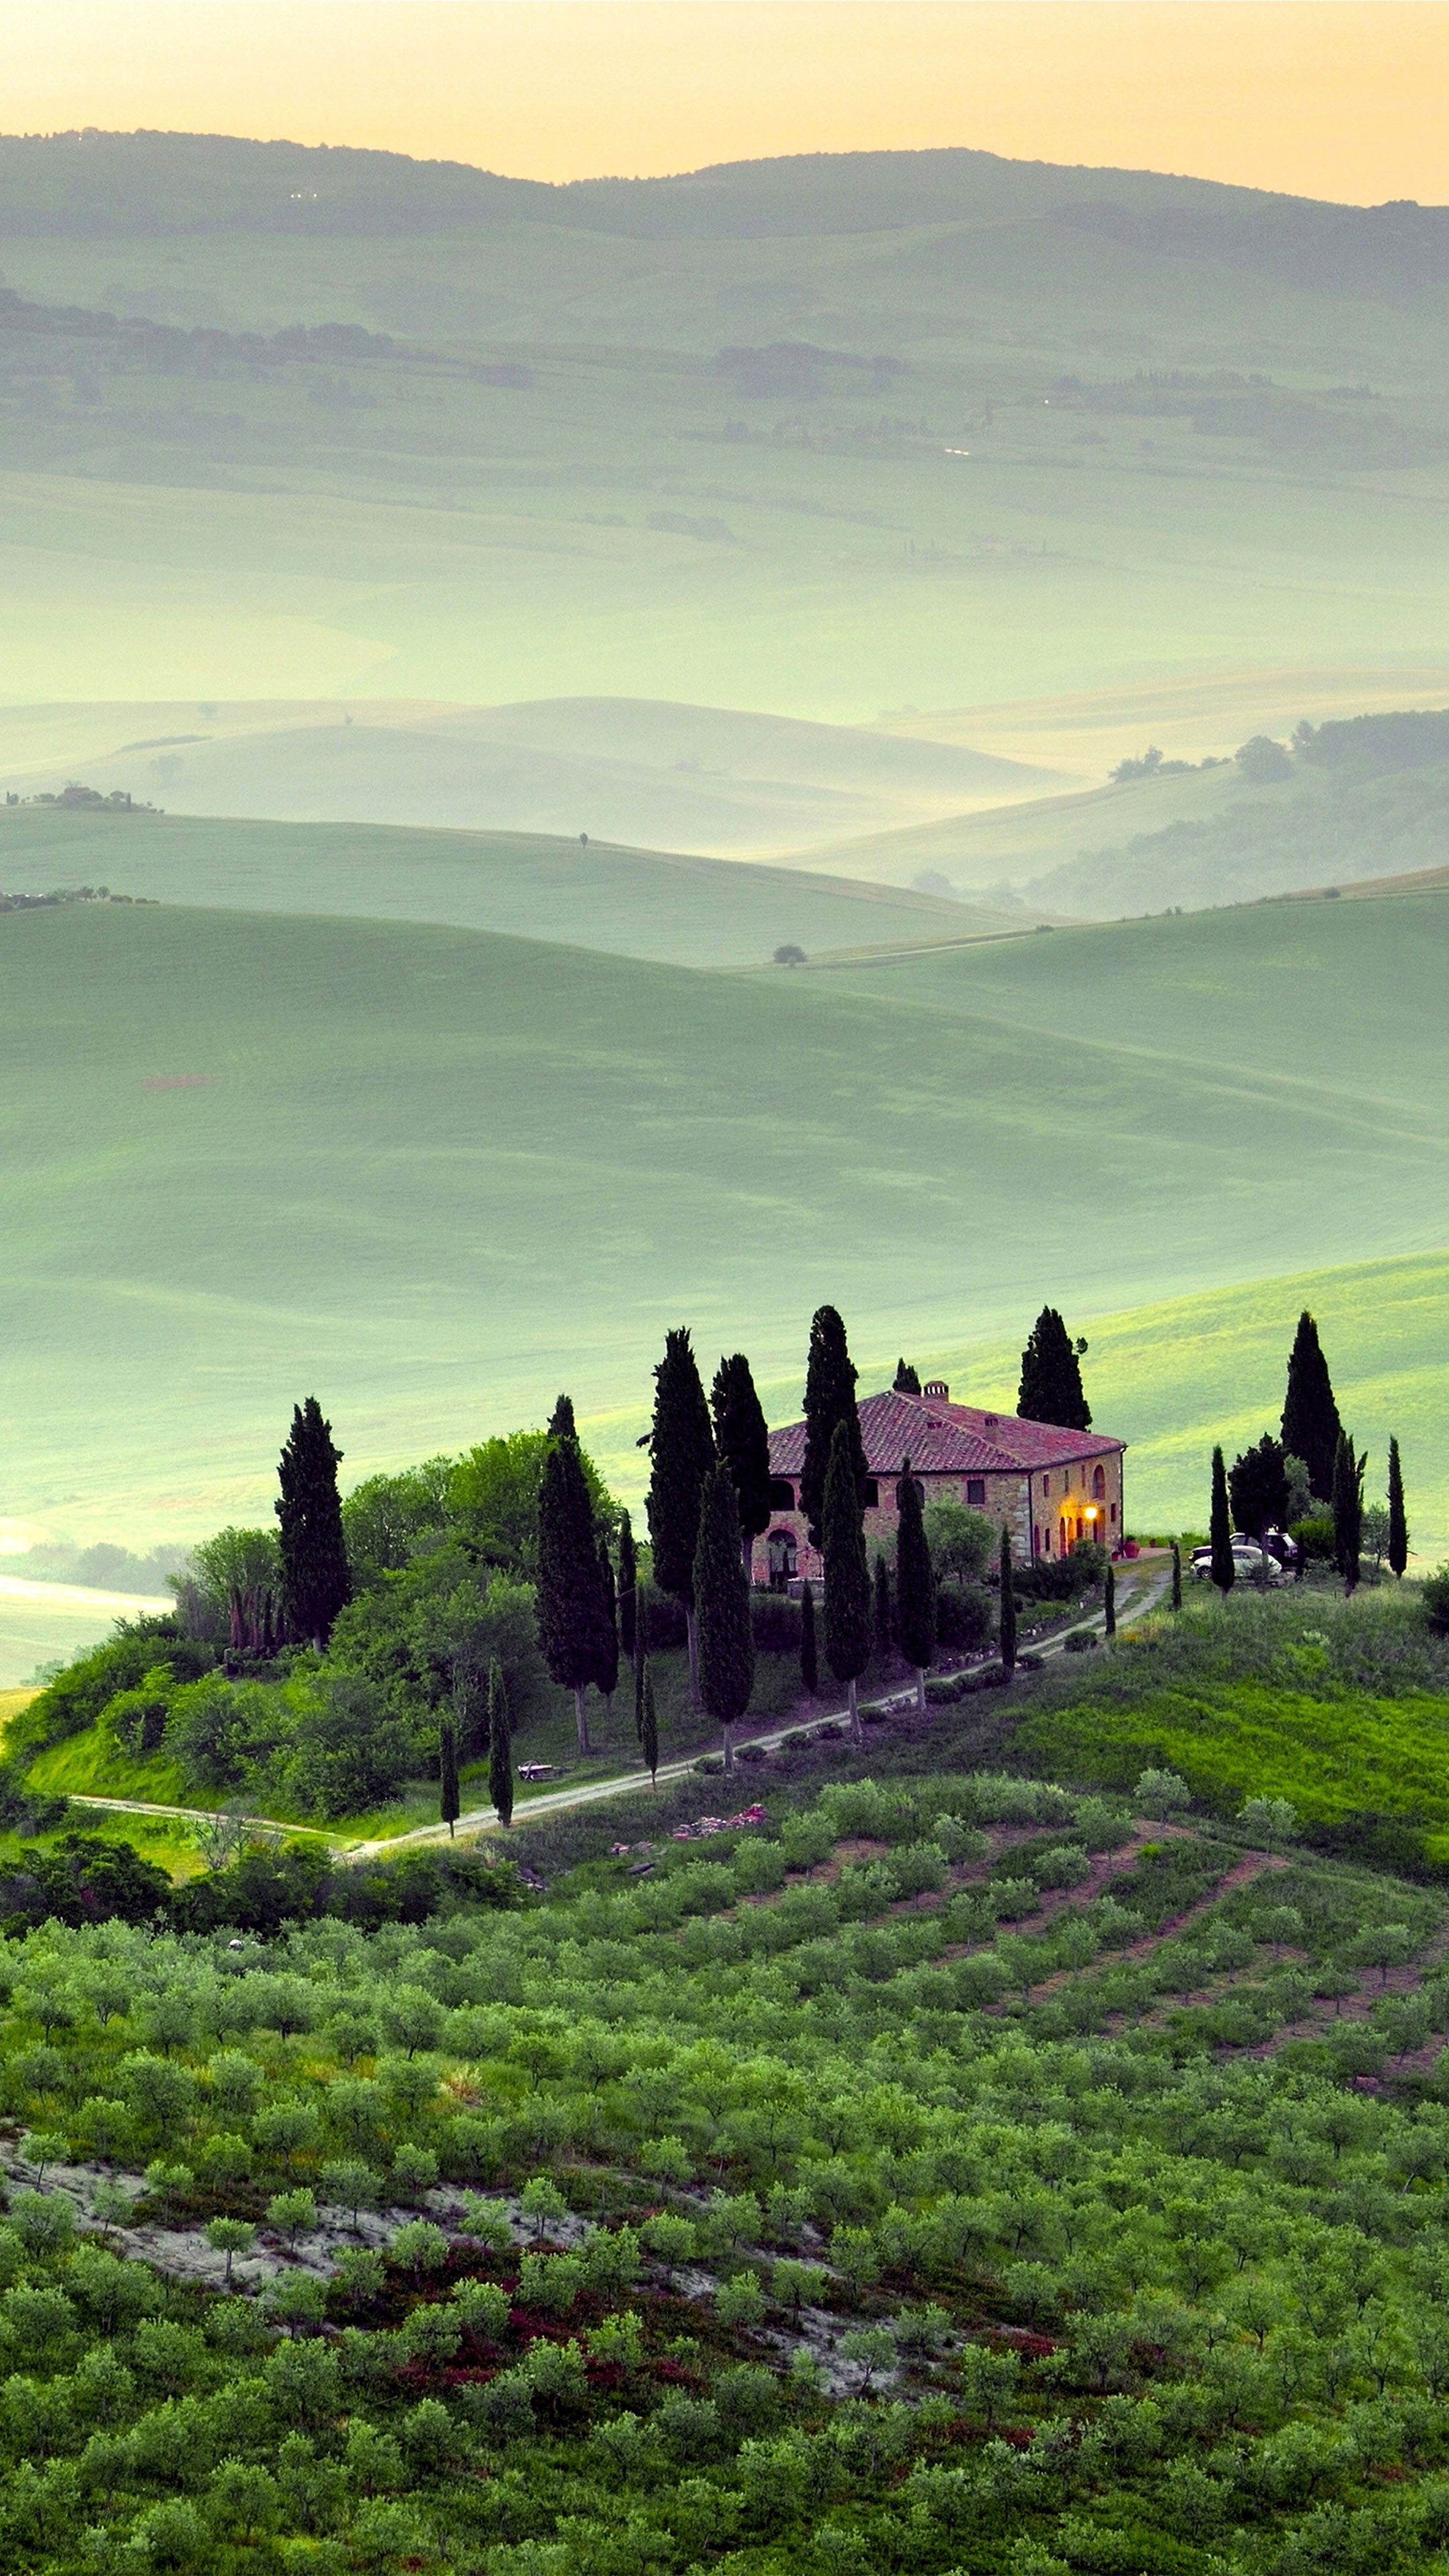 Download Tuscany Italy Landscape Free Pure 4K Ultra HD Mobile Wallpaper2160 x 3840